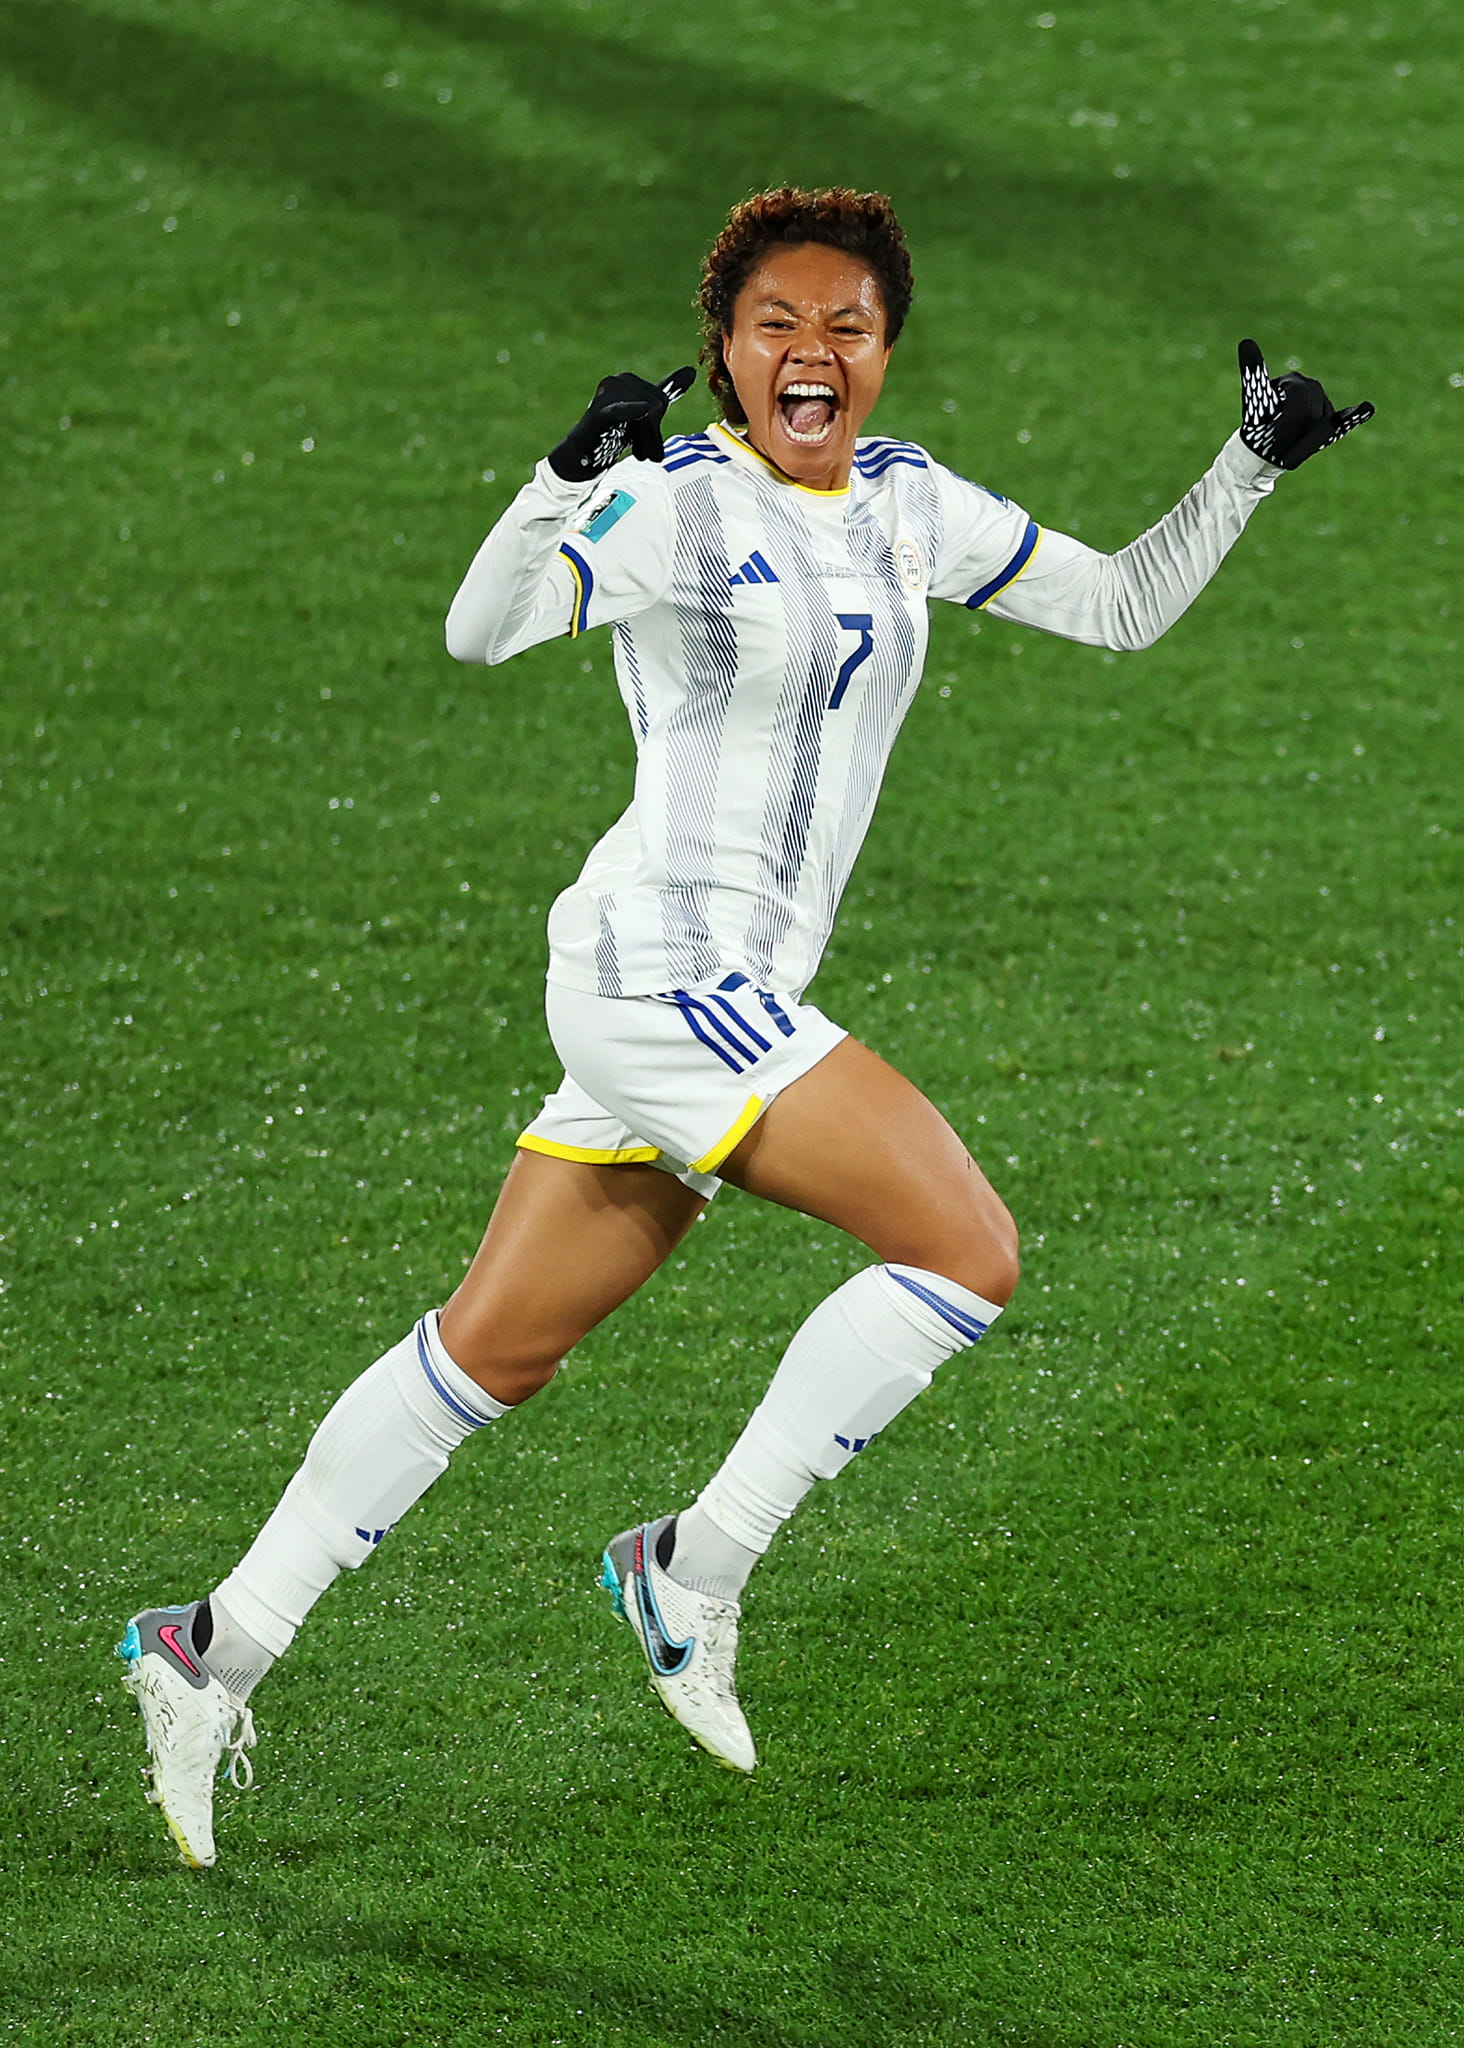 Sarina Bolden scored the Philippines' only goal at the 2023 Women's World Cup